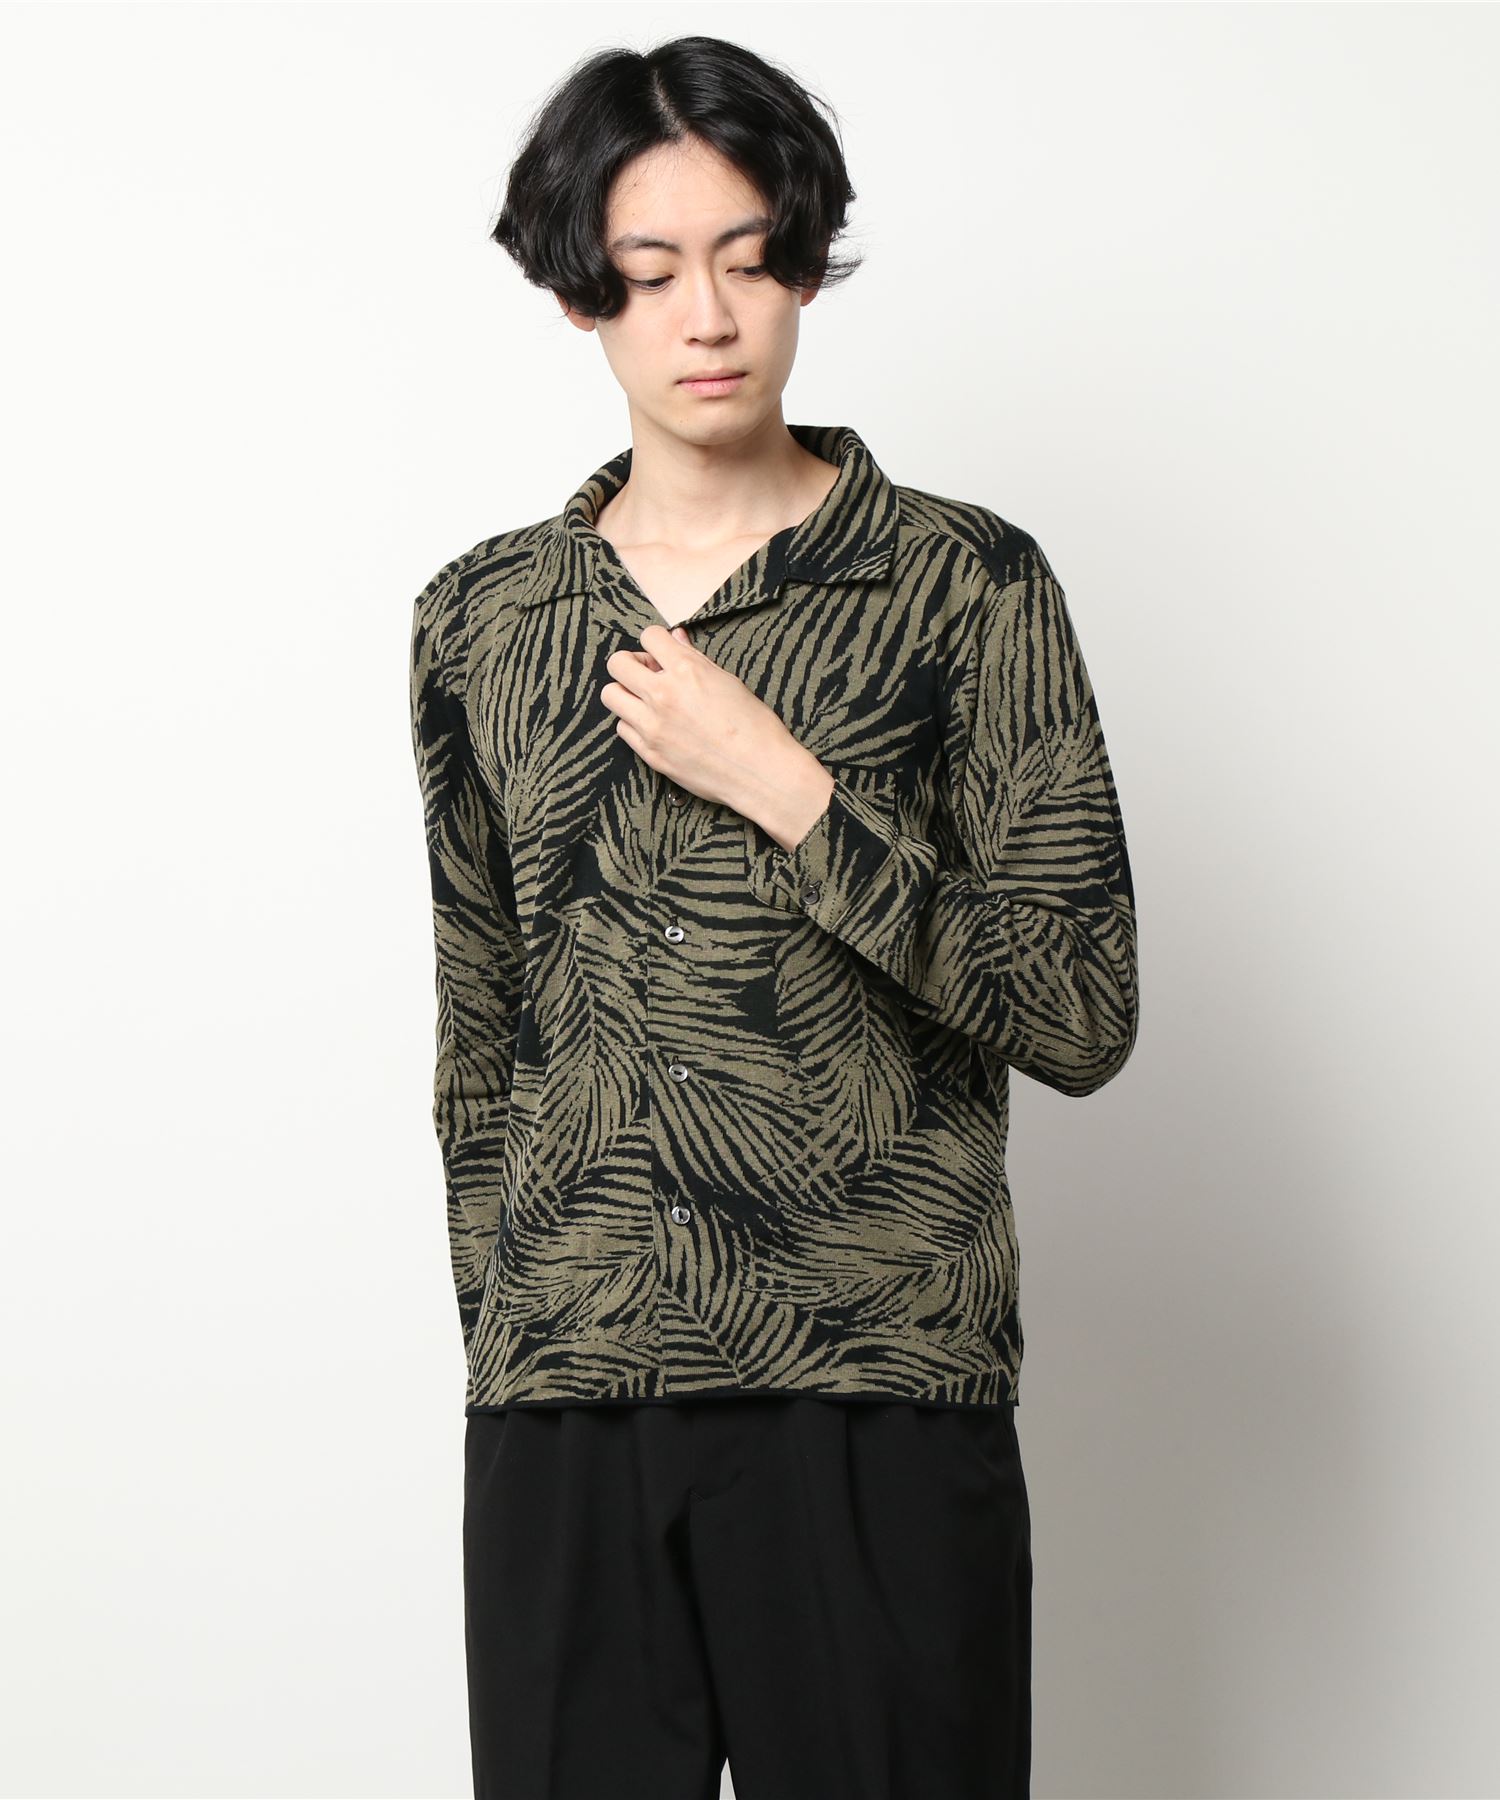 THE 定番キャンバス PENNYPALM 65%OFF【送料無料】 LEAF SHIRTS KNIT